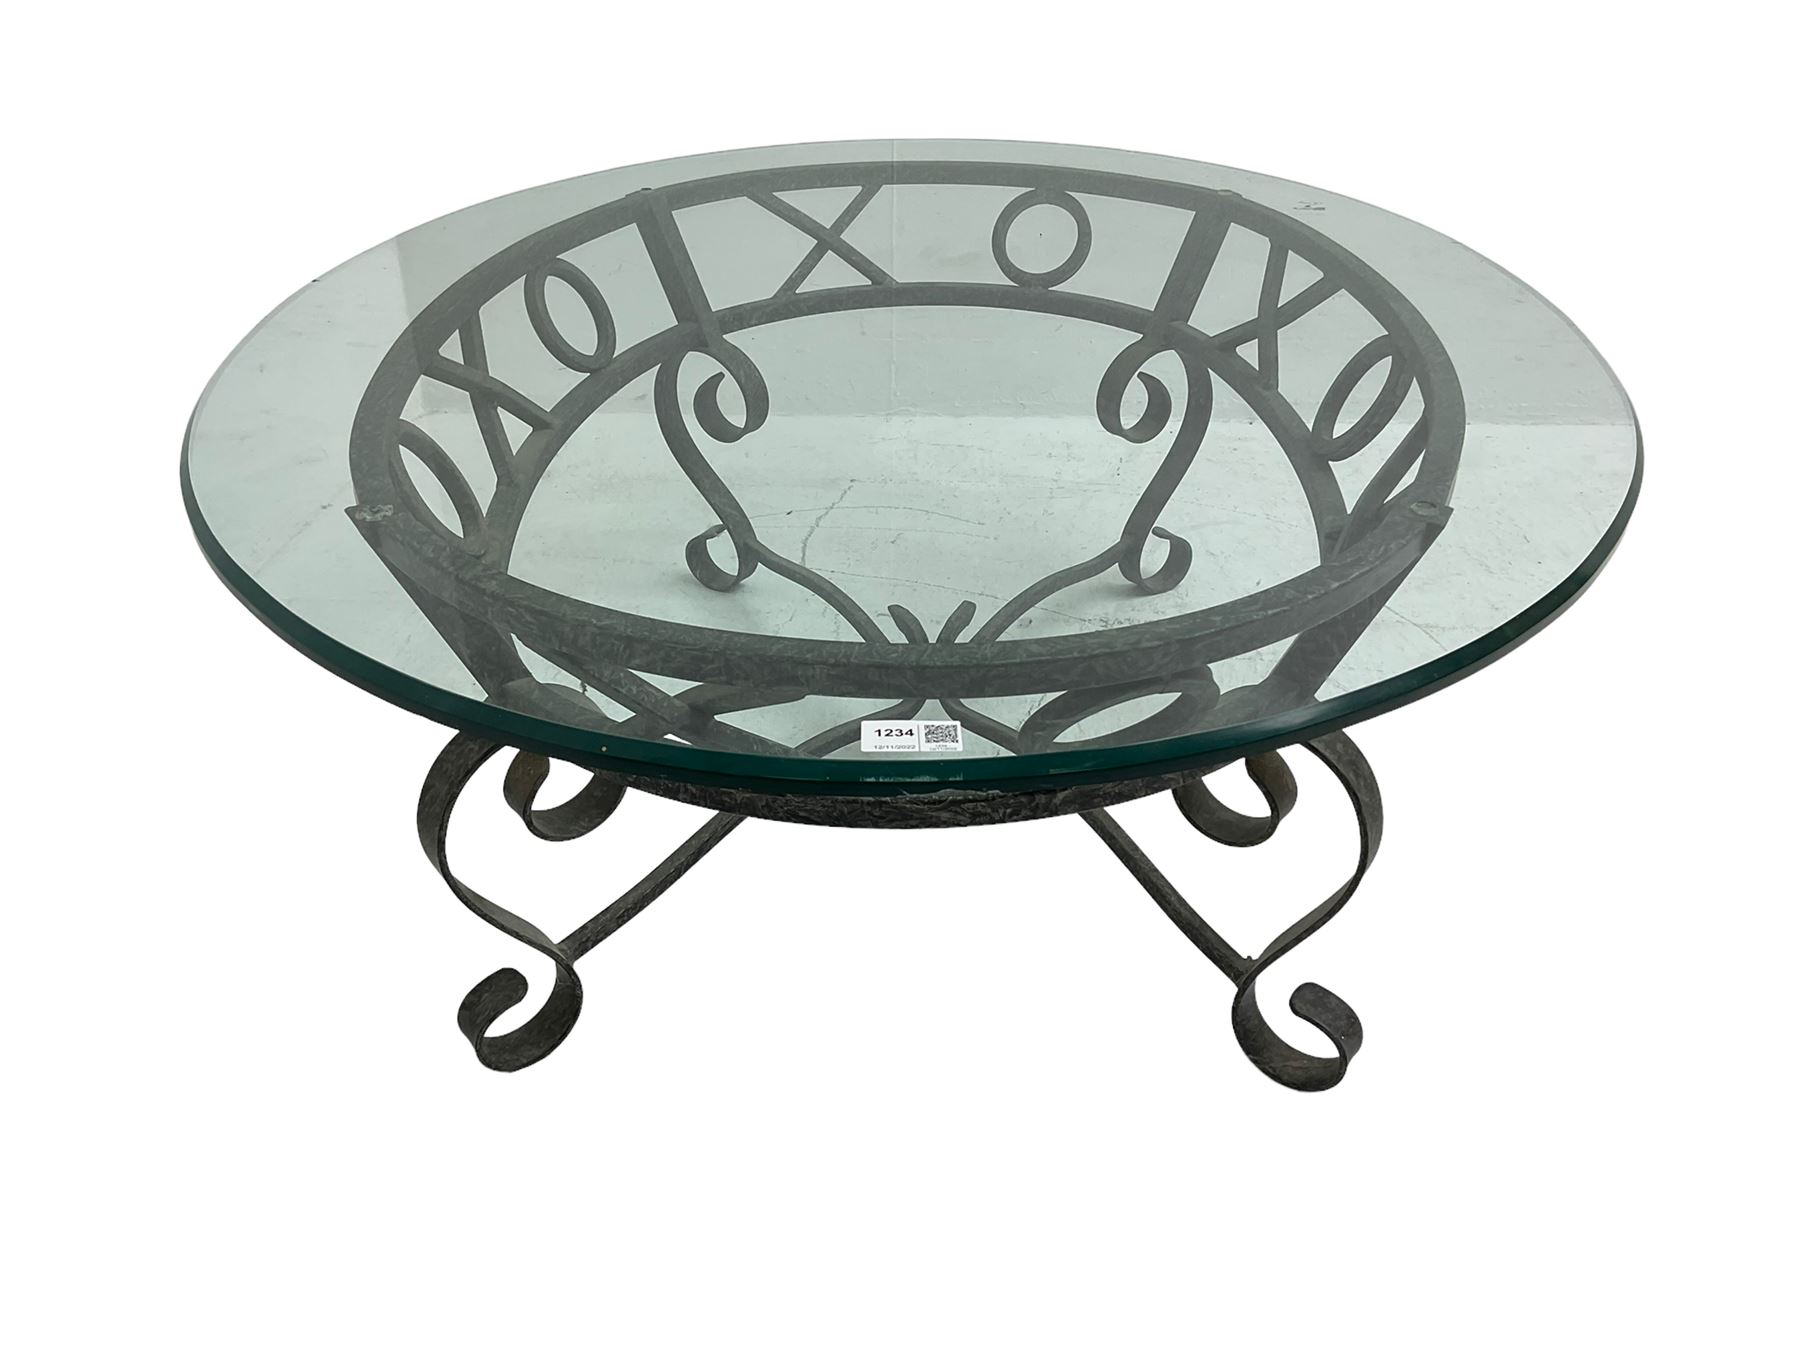 Wrought metal and glass top oval coffee table - Image 4 of 4